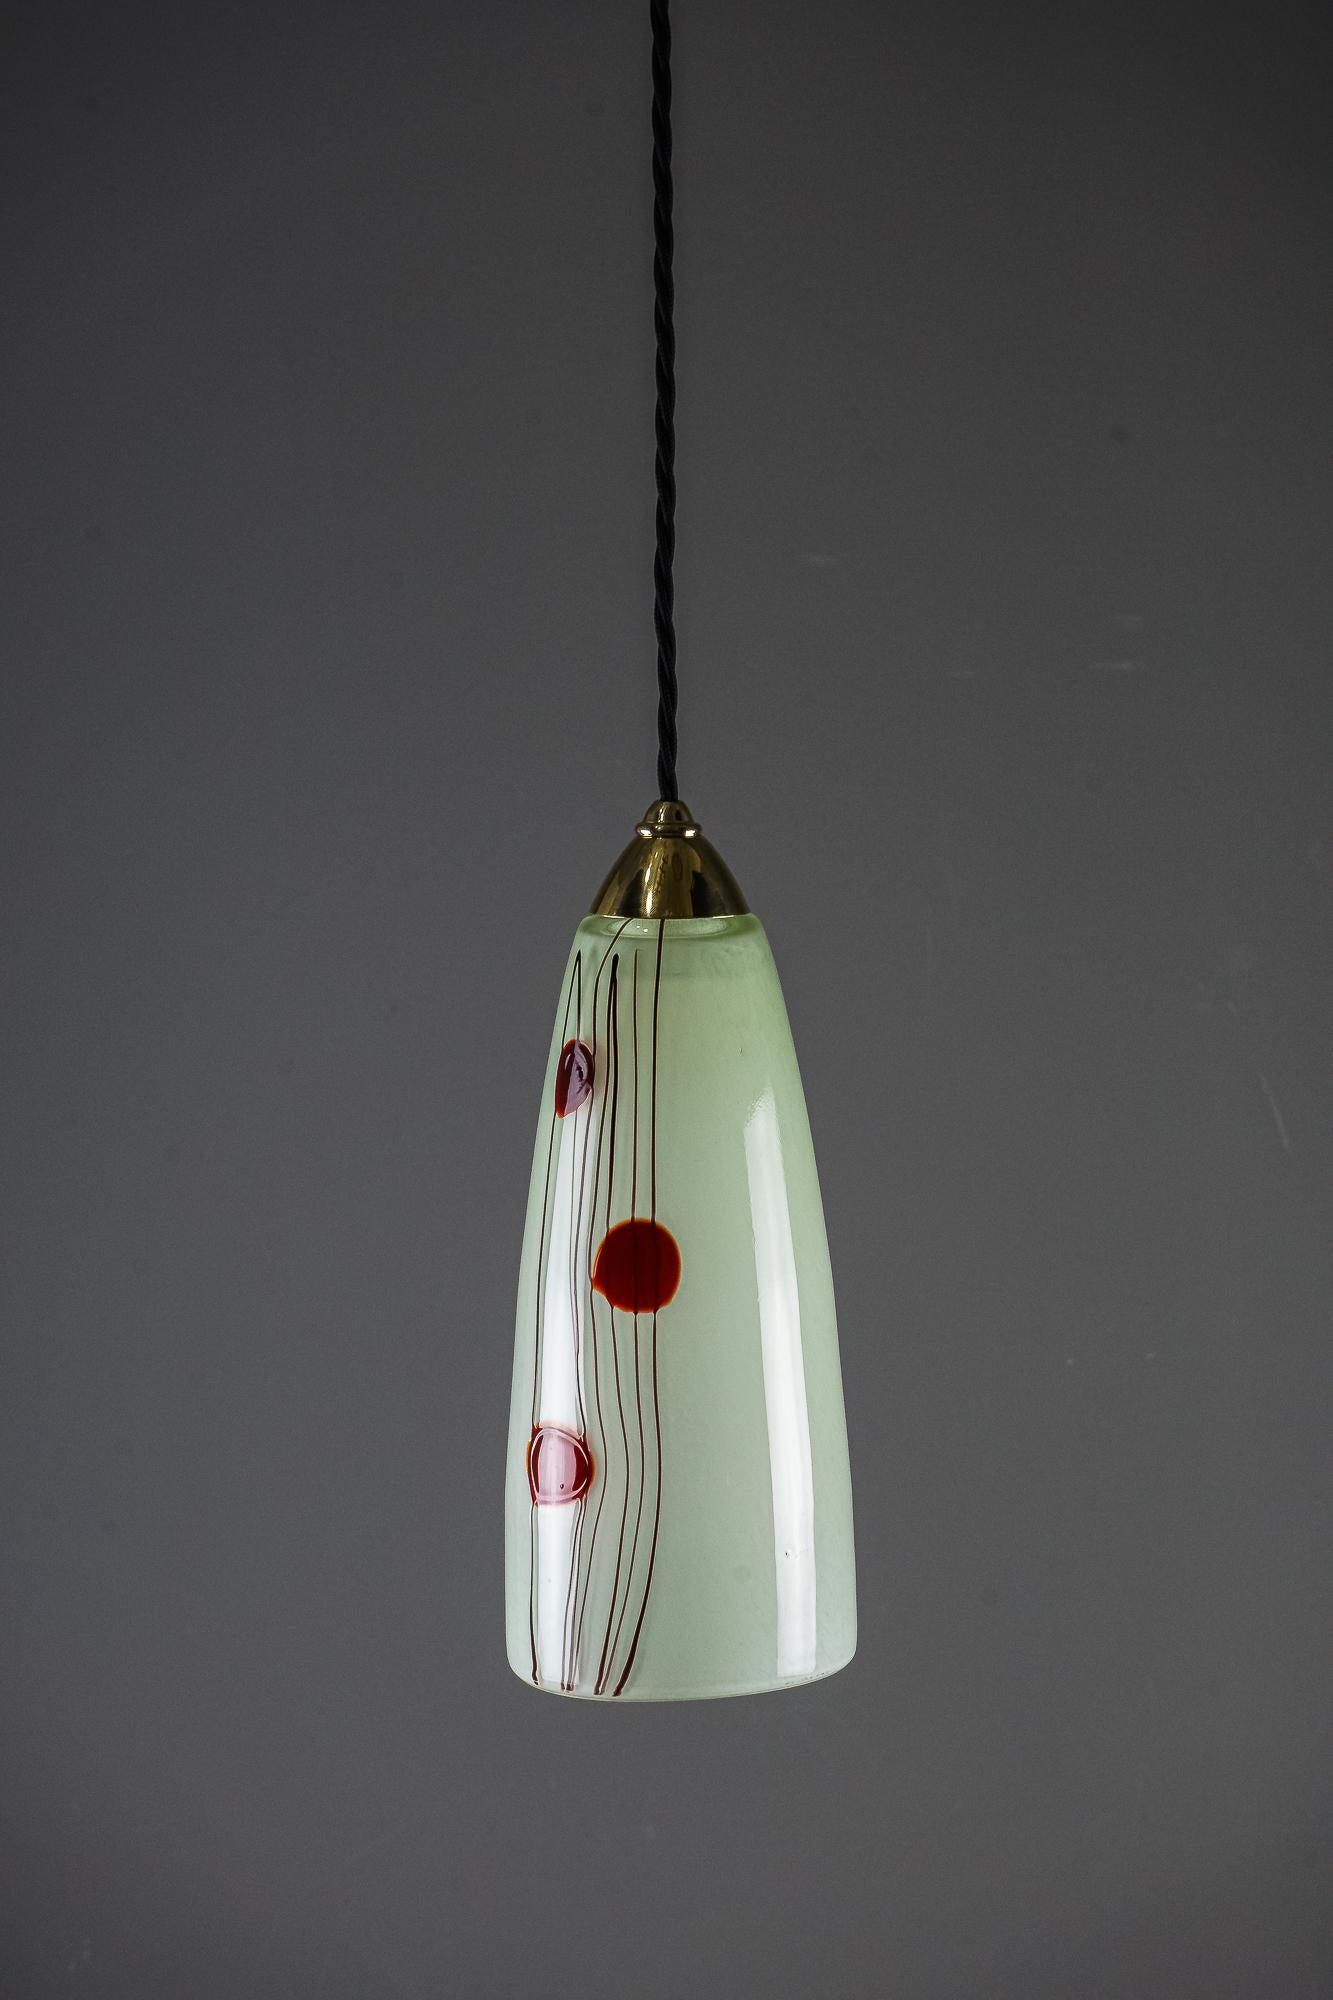 2 Murano pendants, Italy, circa 1980s
Brass parts polished and stove enameled
Wire is new
Price and sale per piece.